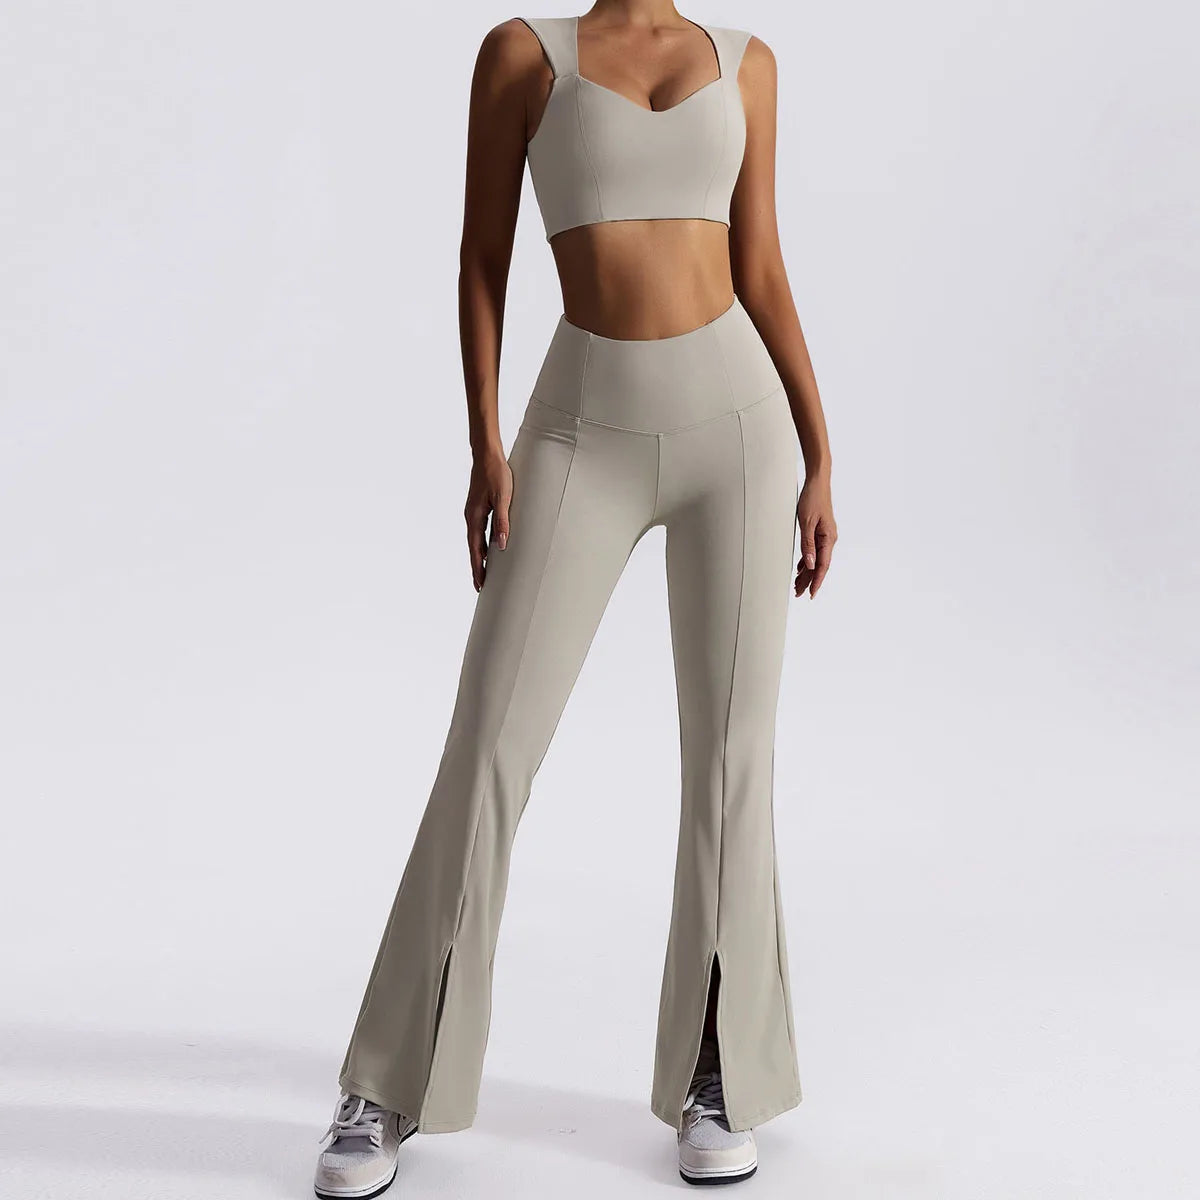 Chic Sports Top and Pants Set